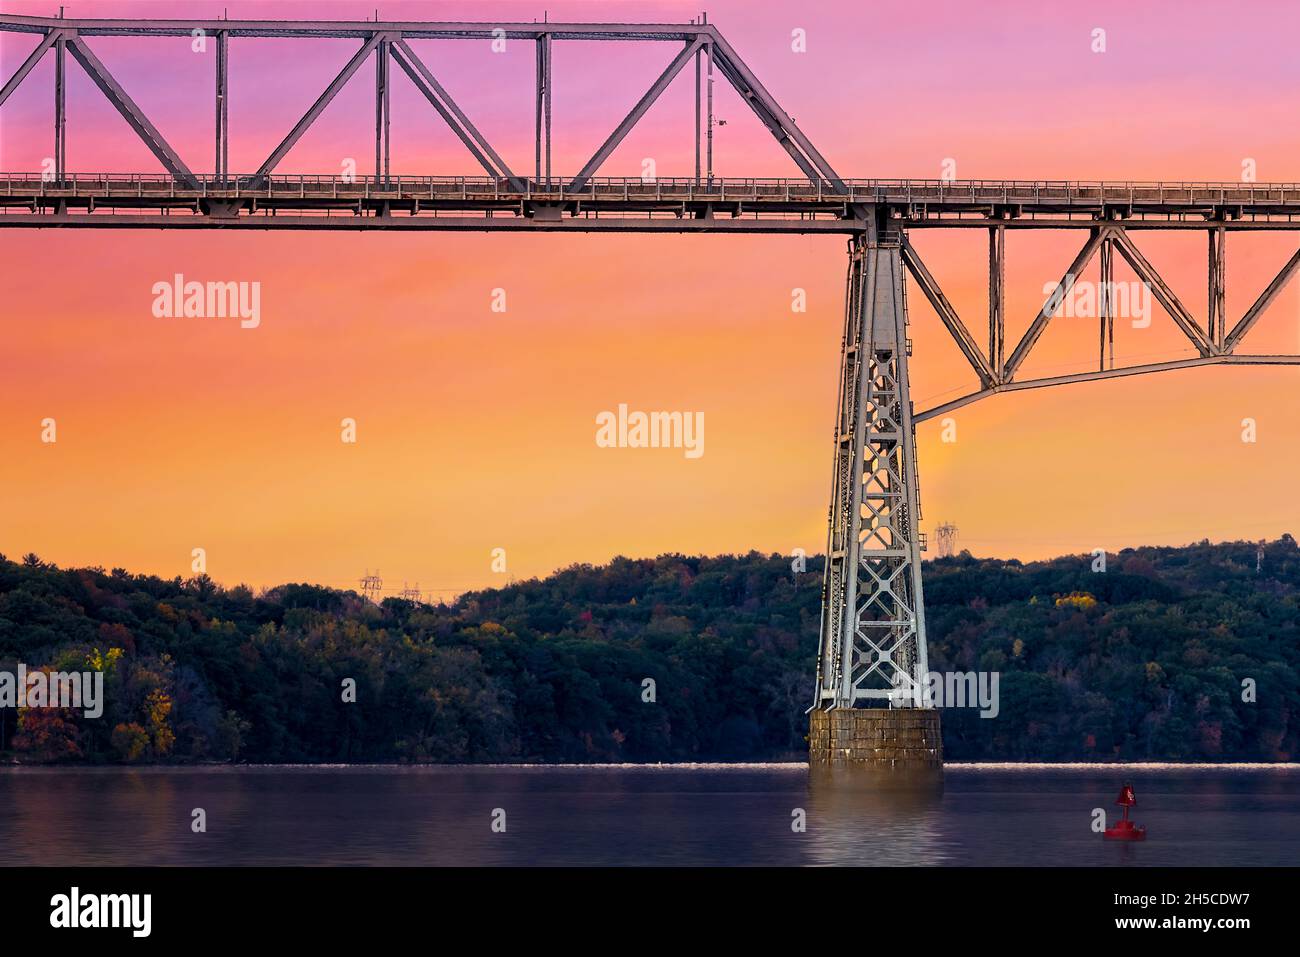 Rip Van Winkle Bridge - The Rip Van Winkle Bridge is a cantilever bridge spanning the Hudson River between Hudson, New York and Catskill, New York. Stock Photo